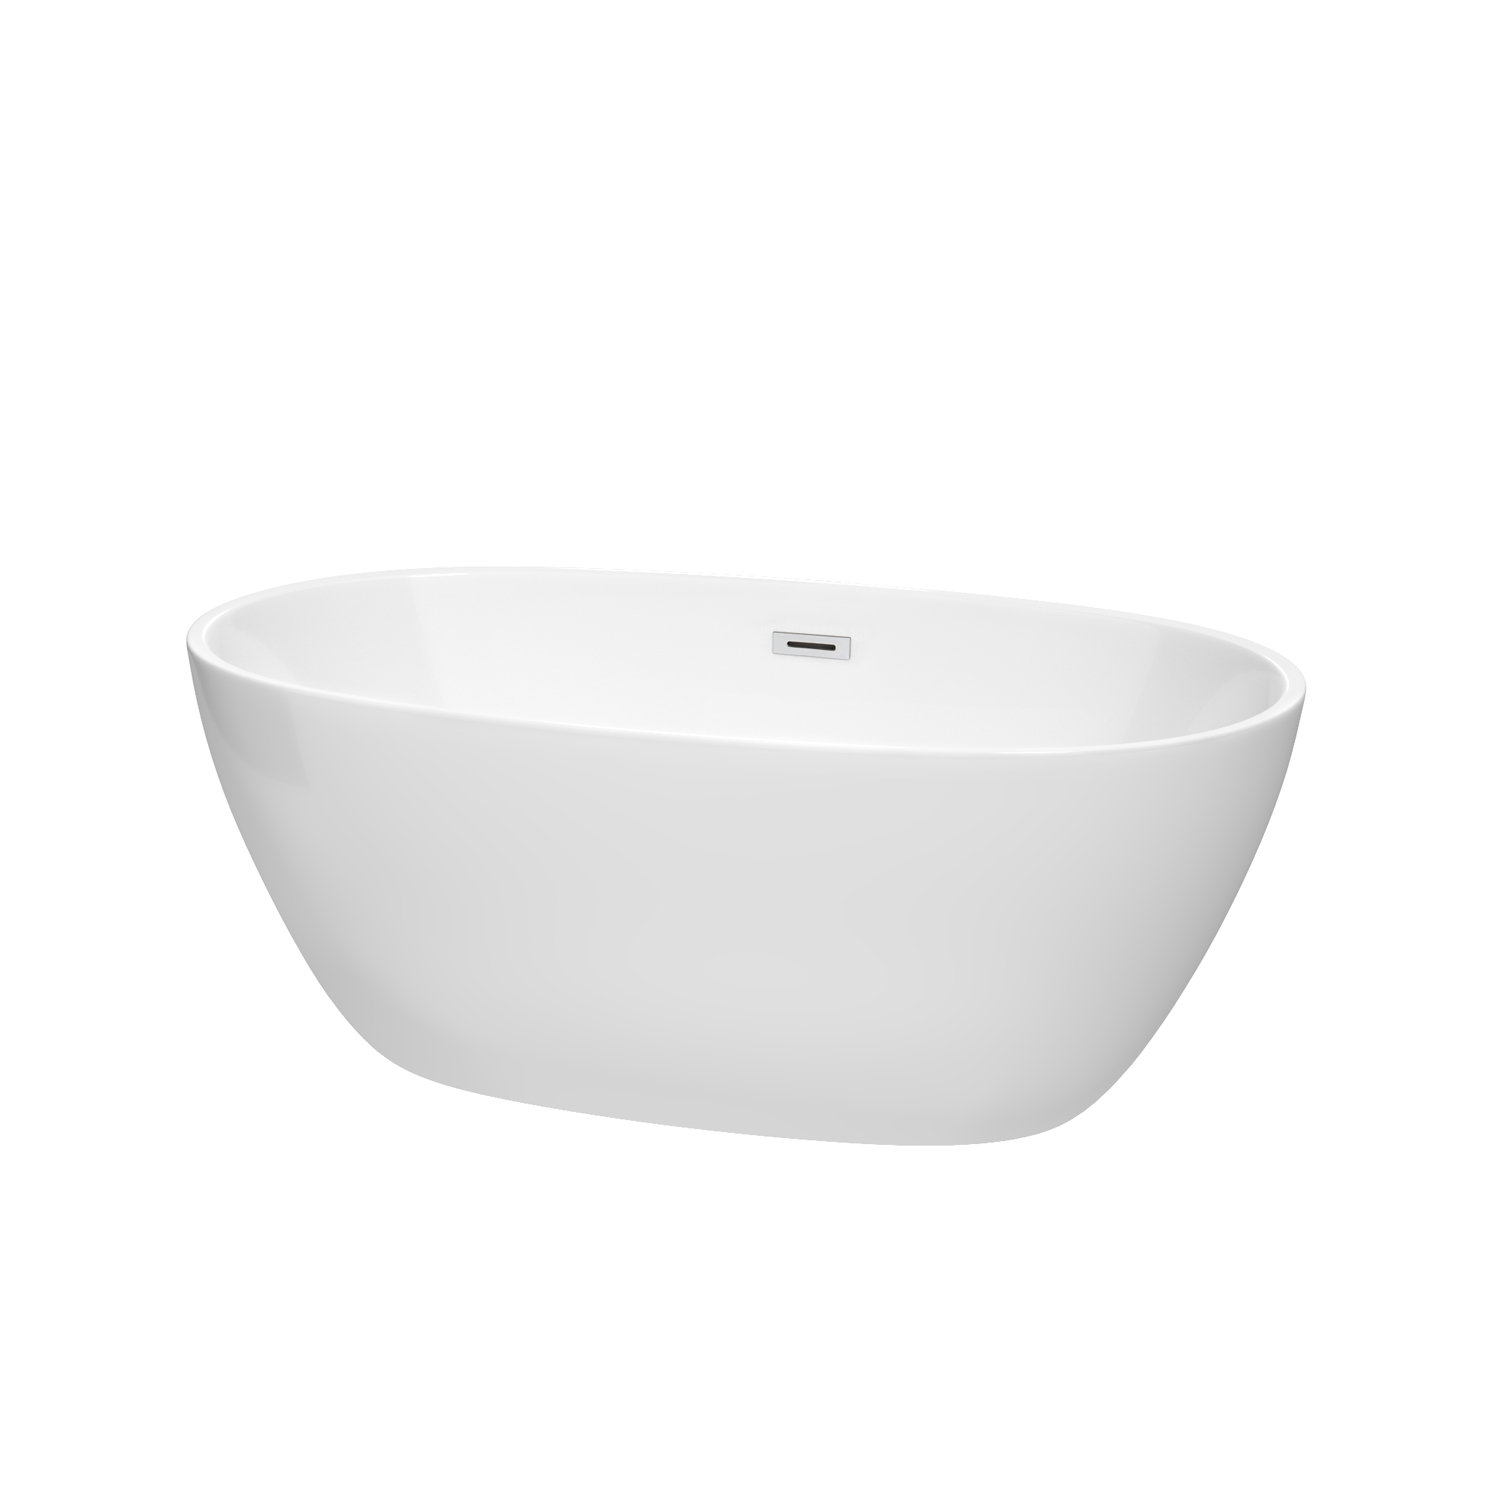 59" Freestanding Bathtub in White with Polished Chrome Drain and Overflow Trim with Hardware and Faucet Option